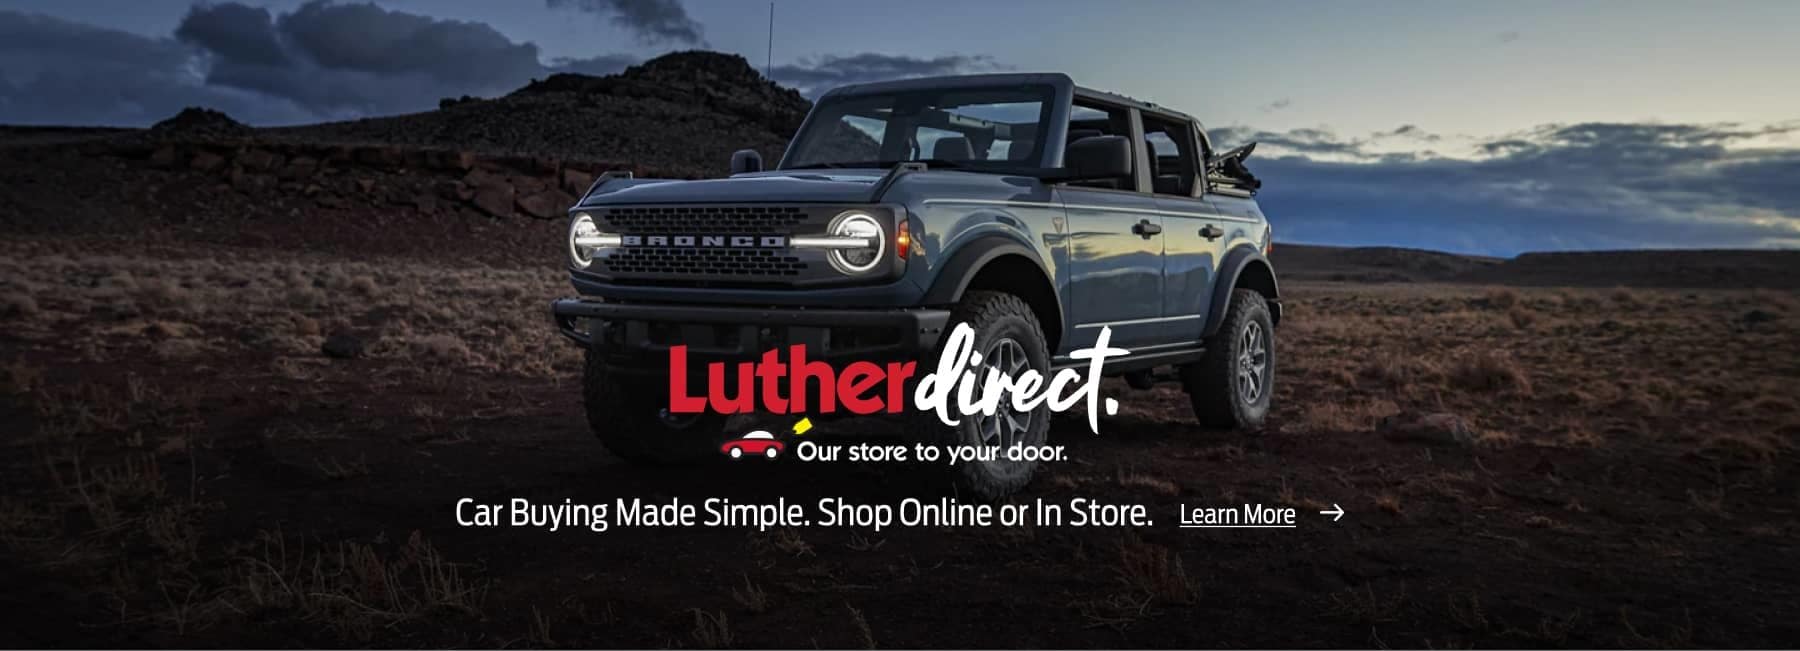 Ford Bronco - Luther Direct - Car Buying Made Simple, Shop Online or In Store